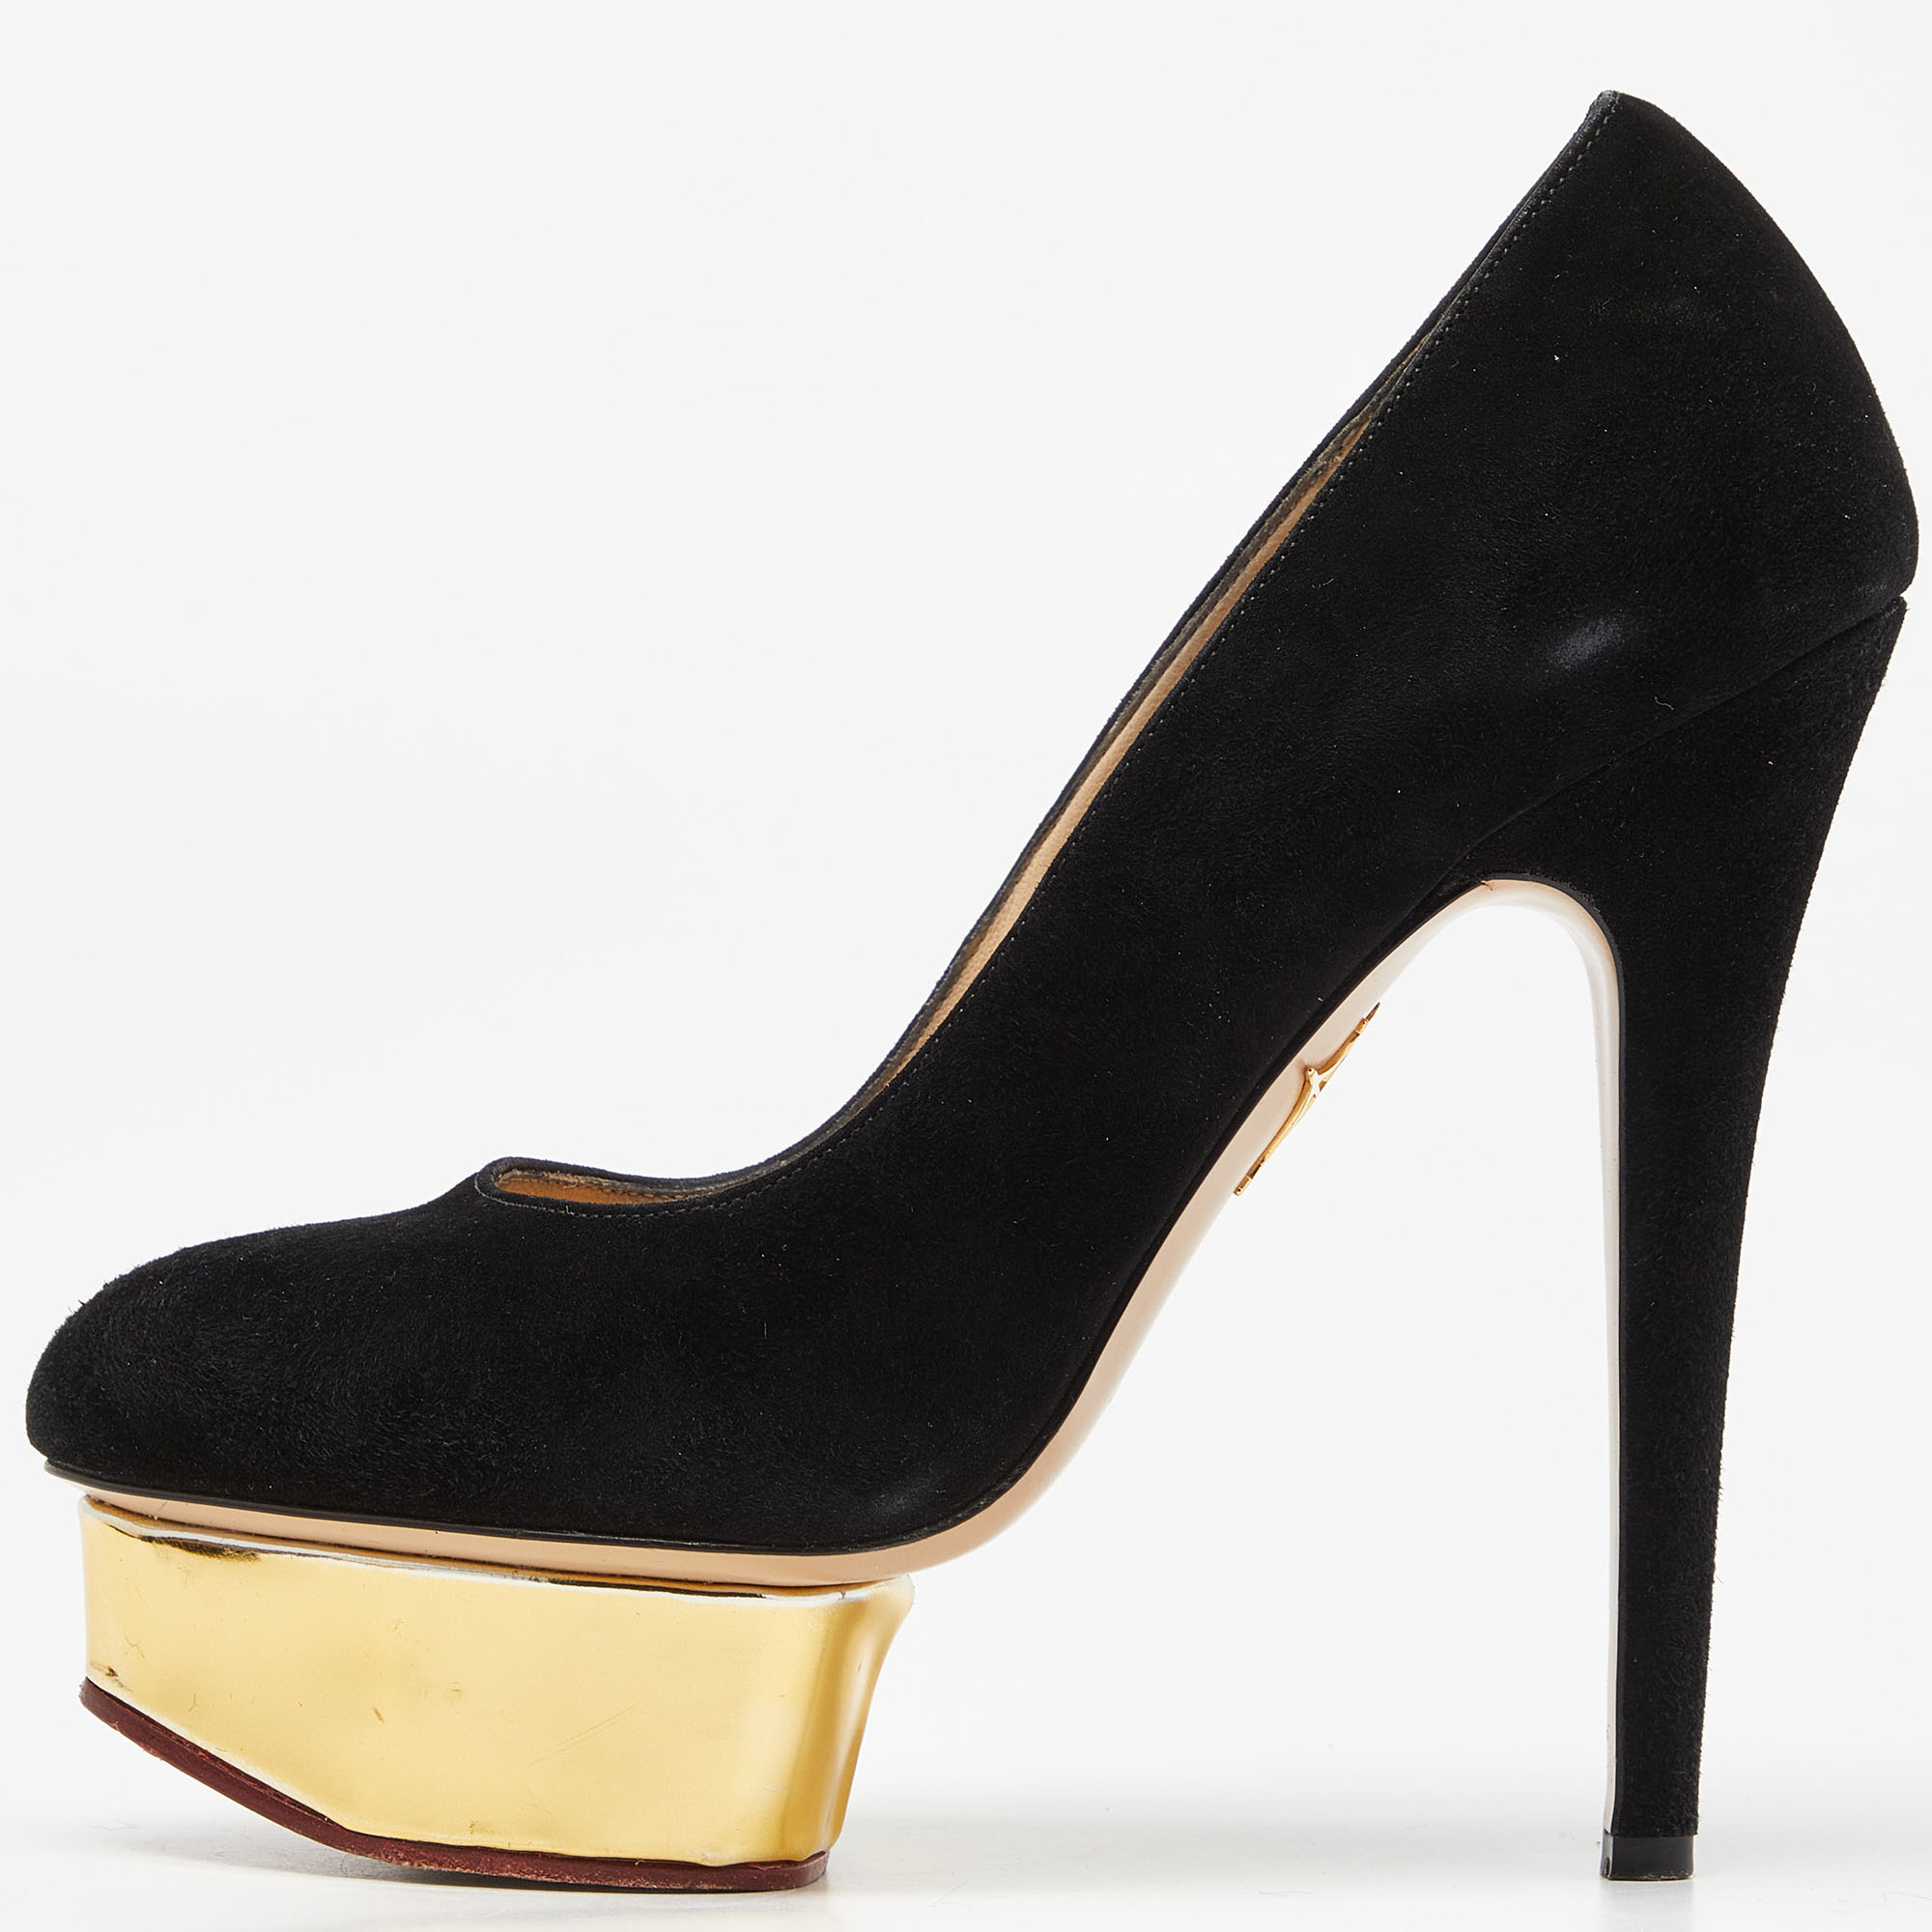 Charlotte olympia black suede dolly platform pumps size 37.5